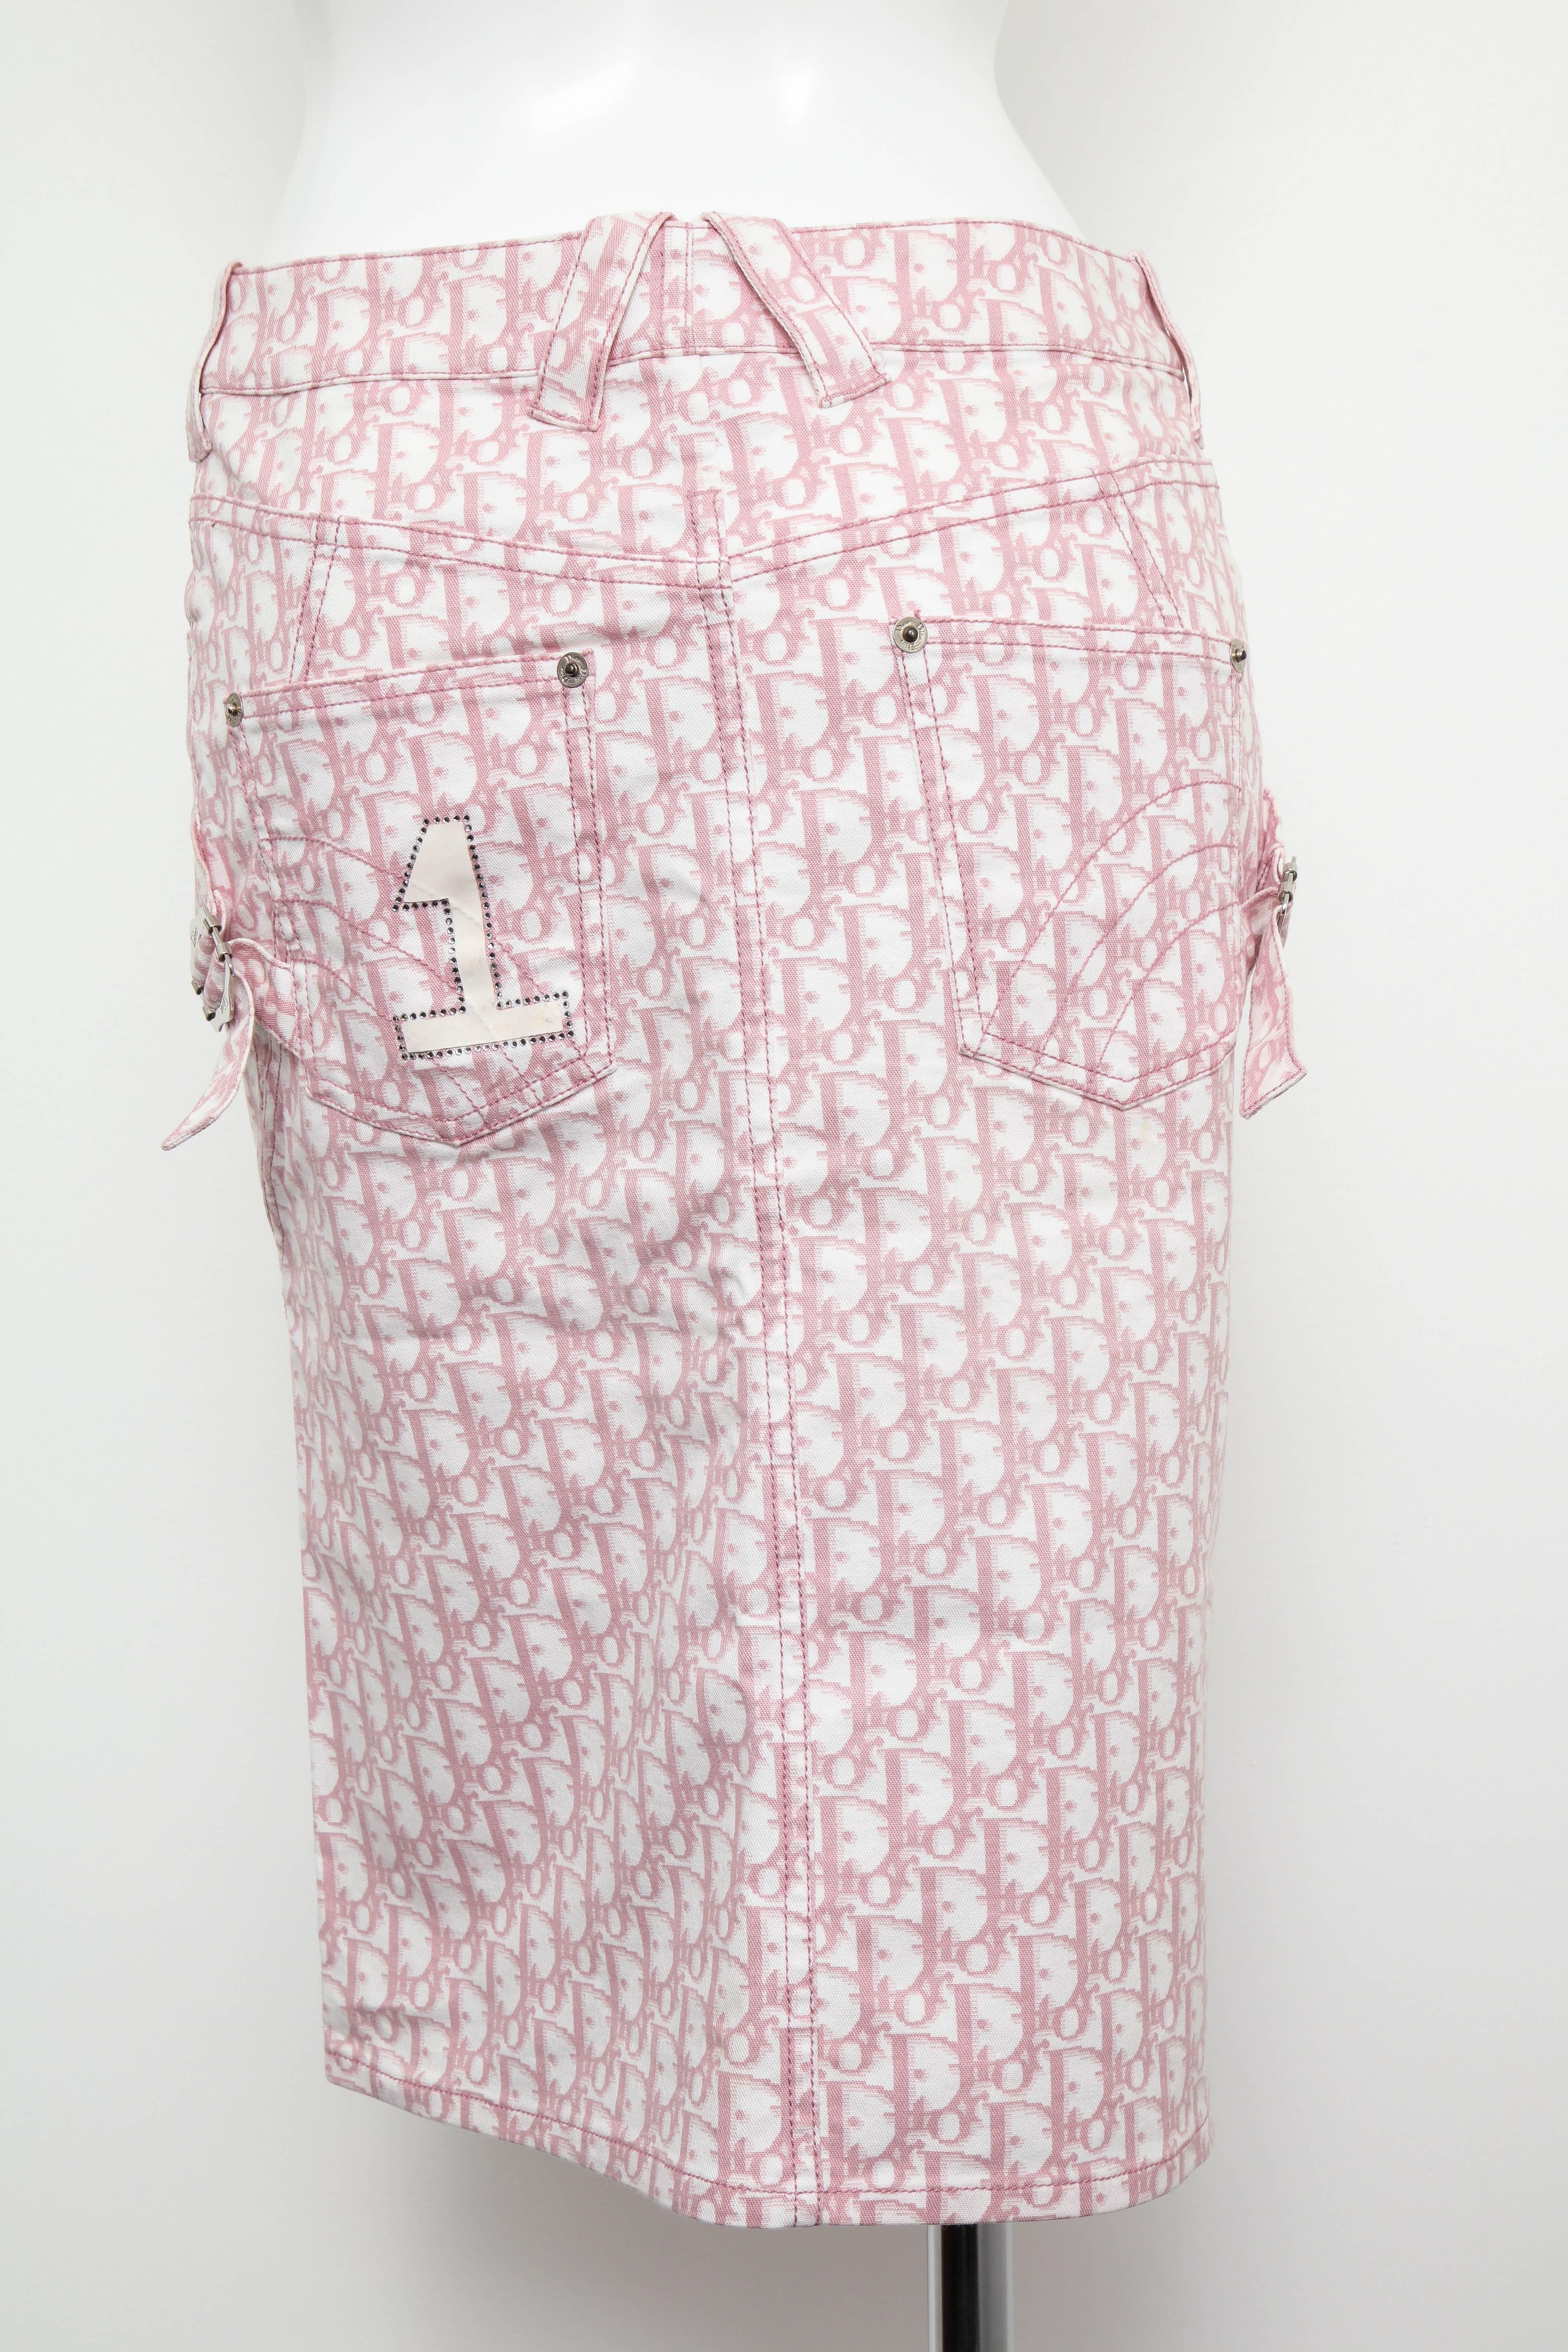 John Galliano for Christian Dior Pink Trotter Logo Pencil Skirt In Excellent Condition For Sale In Chicago, IL